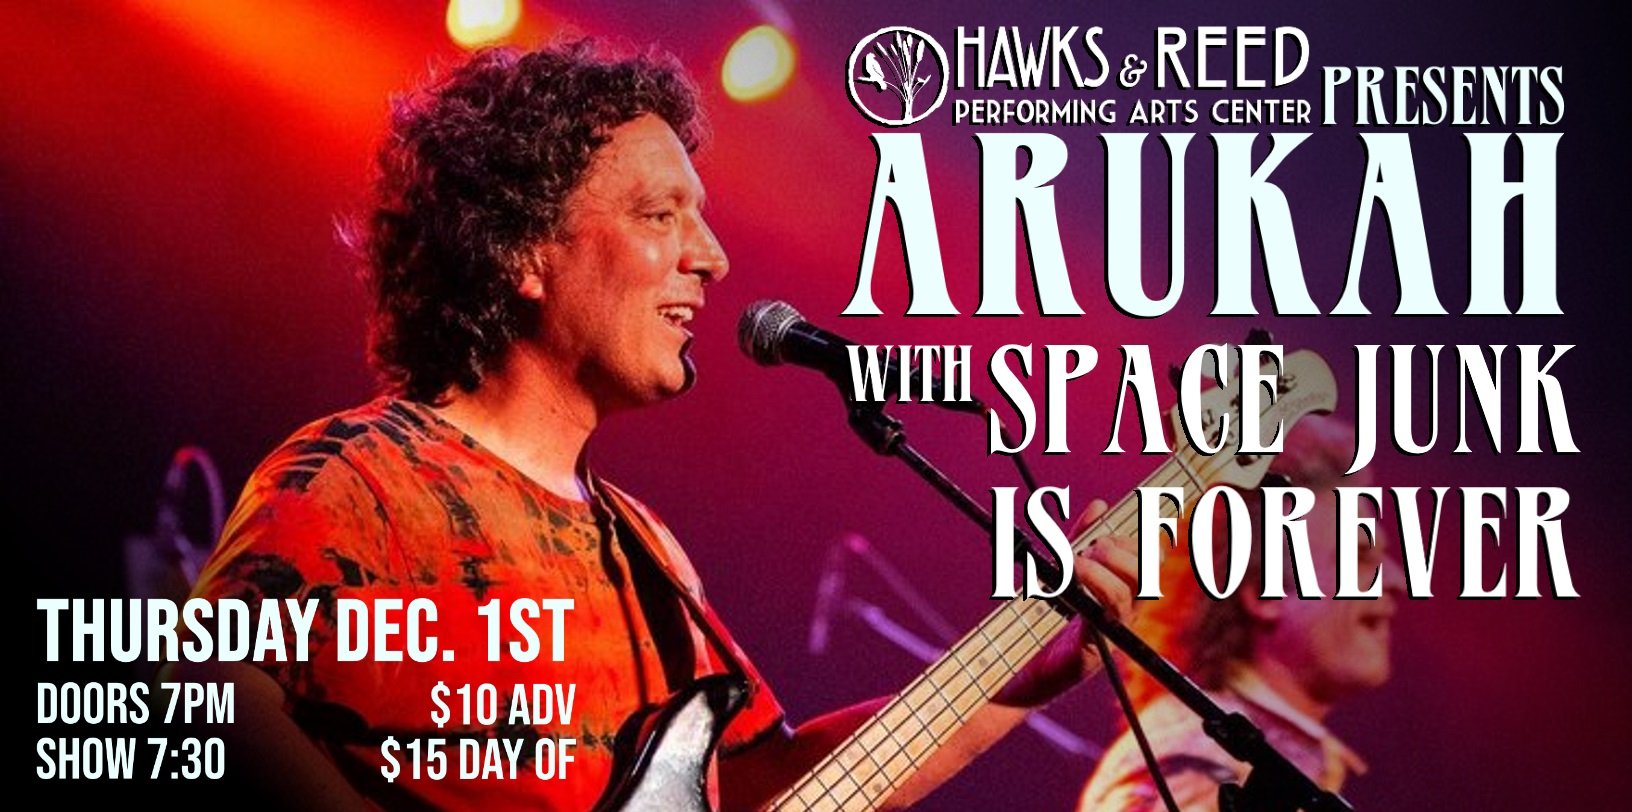 Arukah with Space Junk is Forever at Hawks & Reed